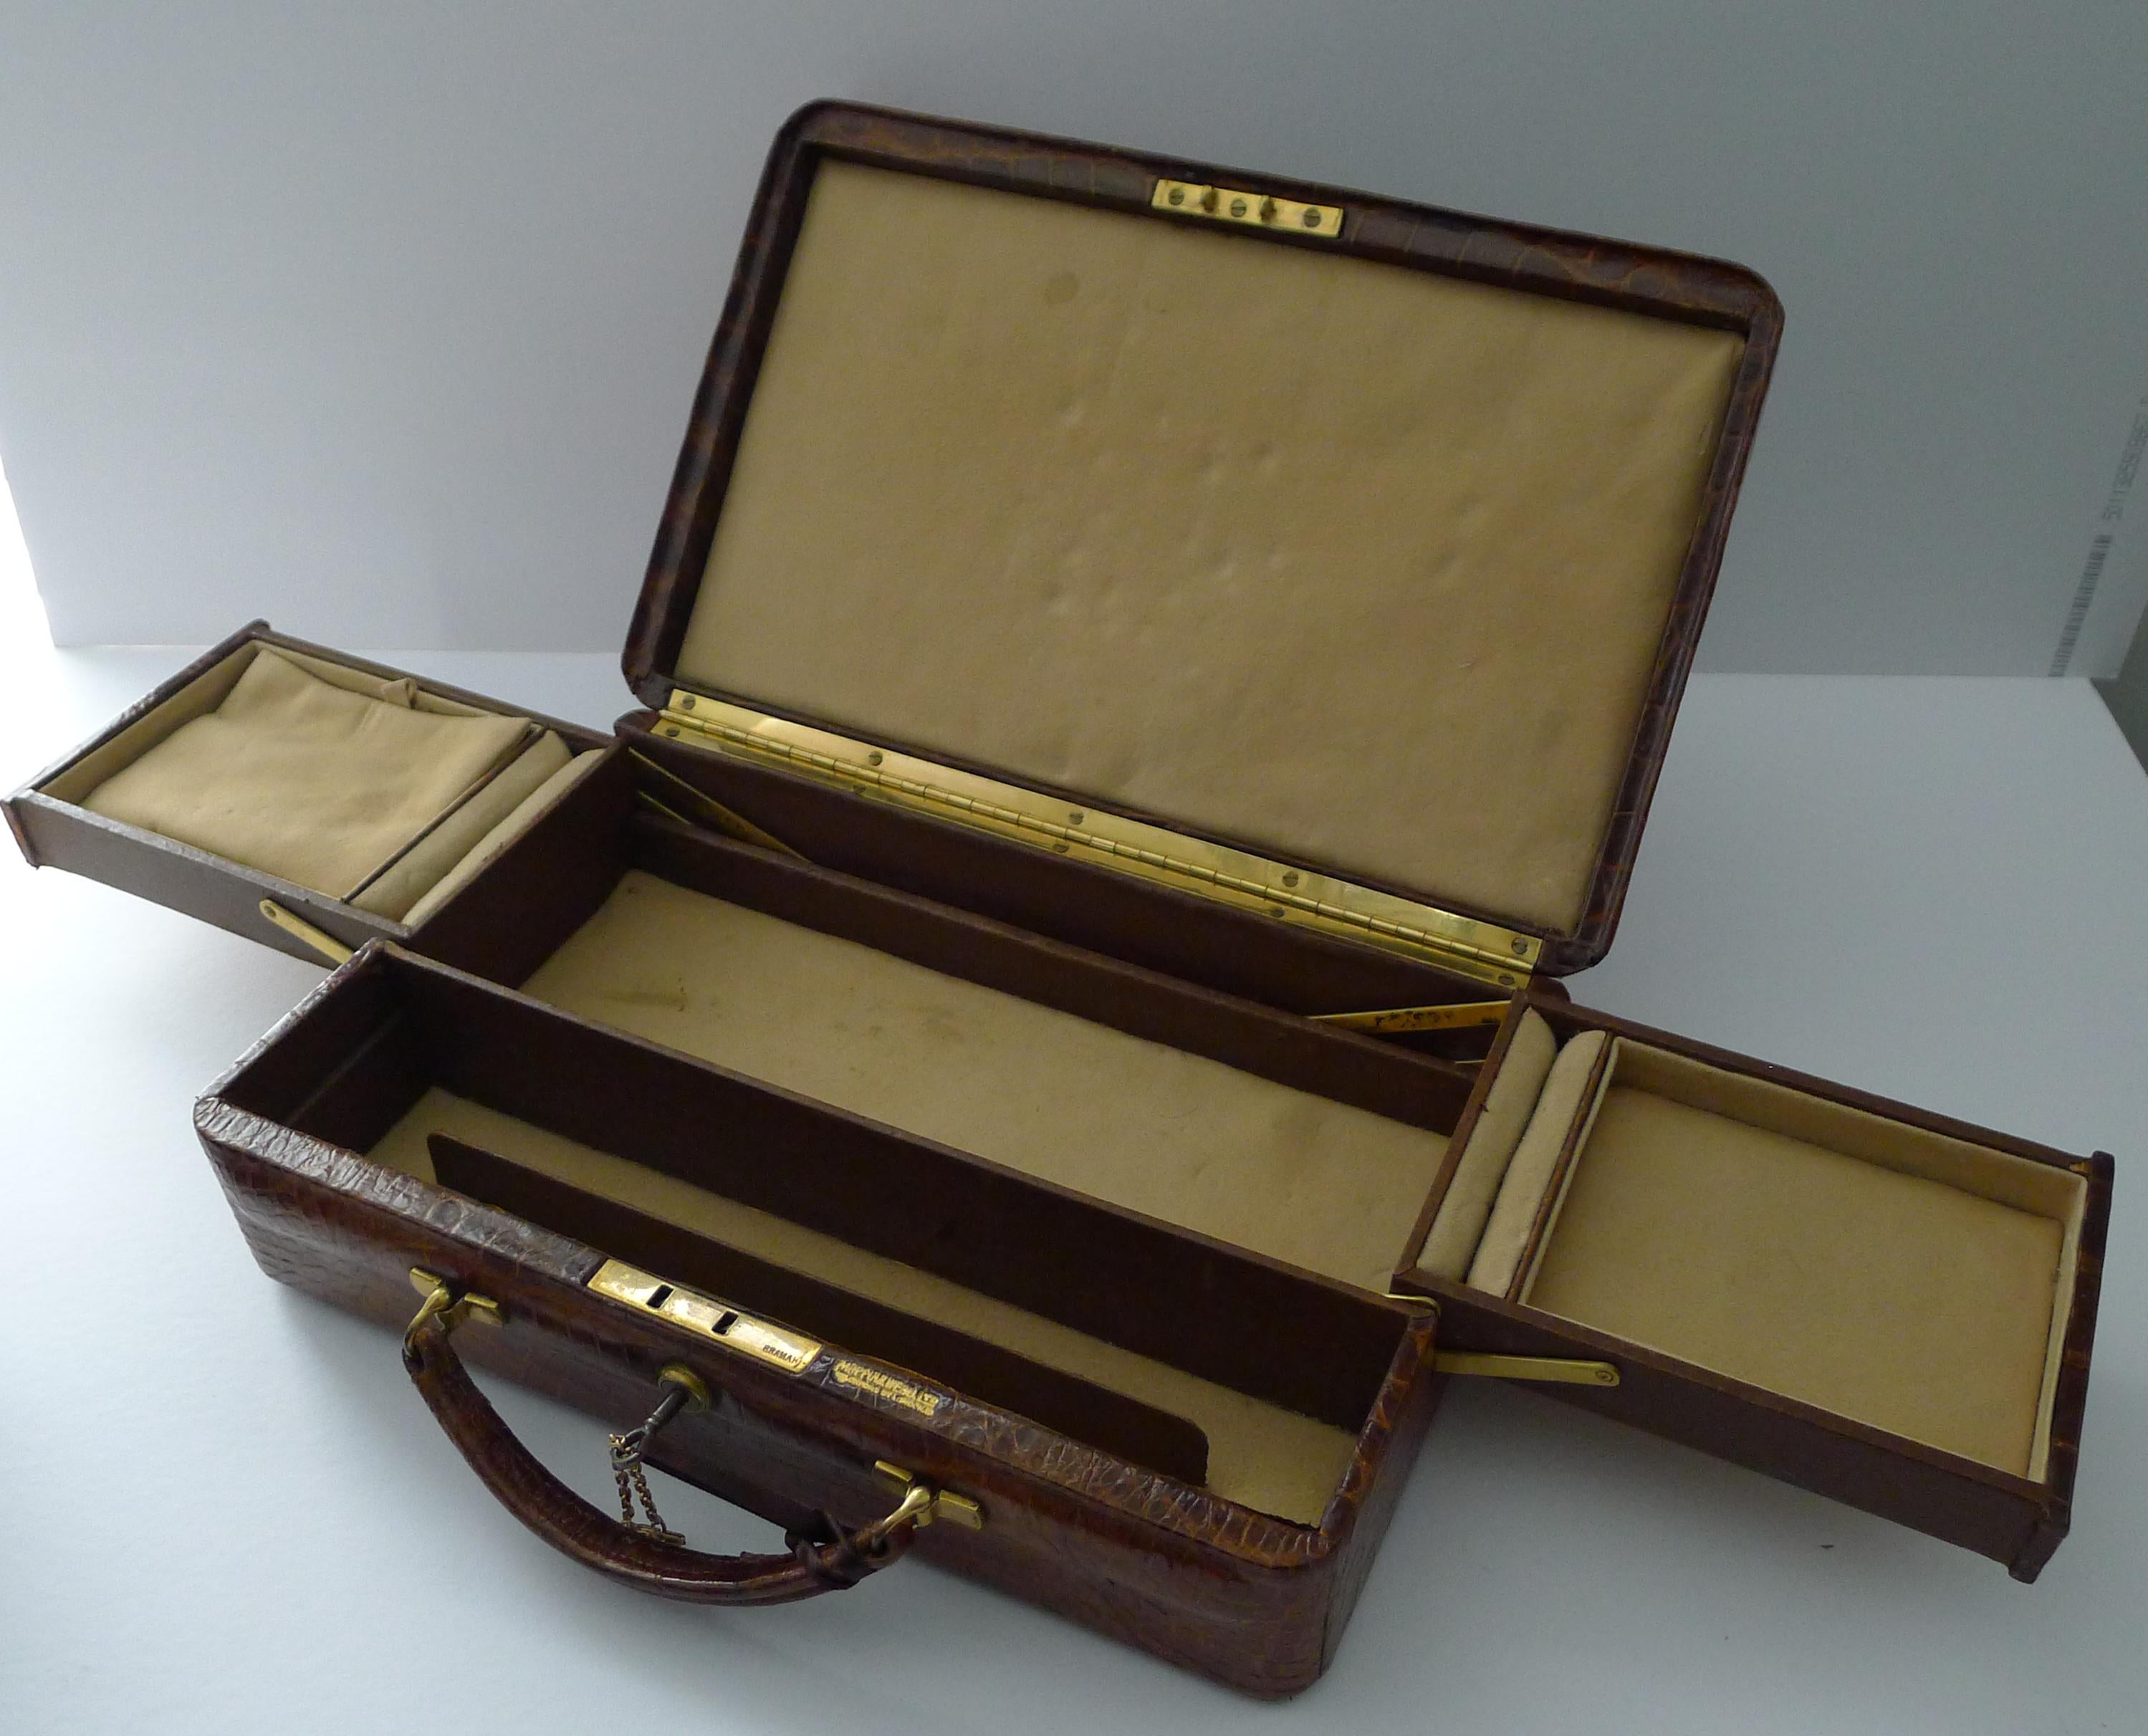 Superb Antique English Crocodile Jewelry Box by Mappin & Webb For Sale 2